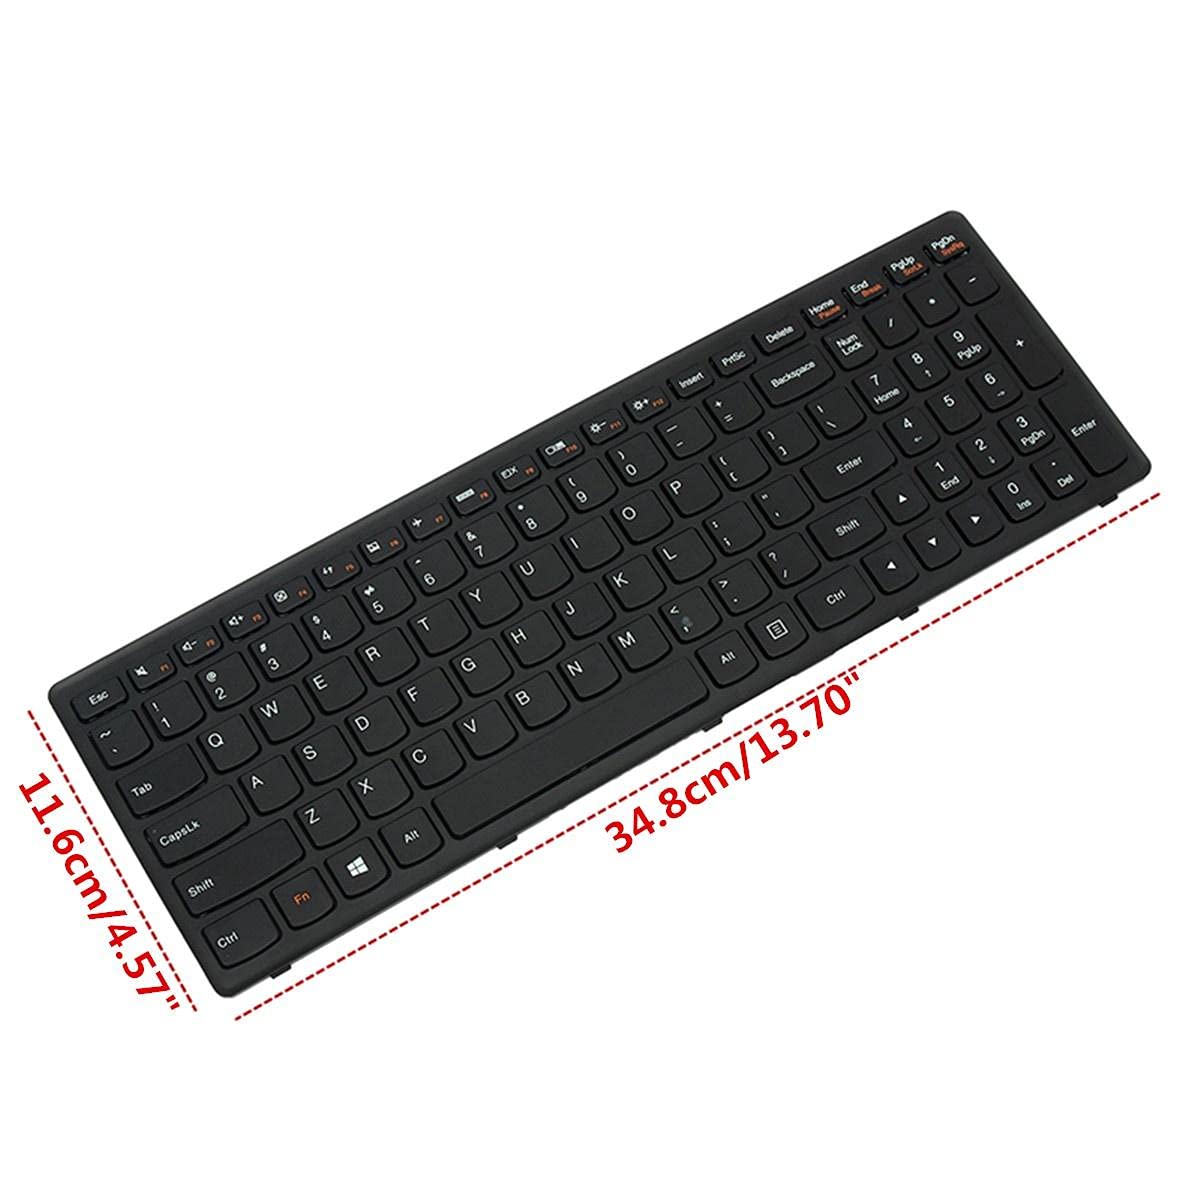 WISTAR Laptop Keyboard Compatible for Lenovo IdeaPad G500S G505S S500 S510 S510P Series